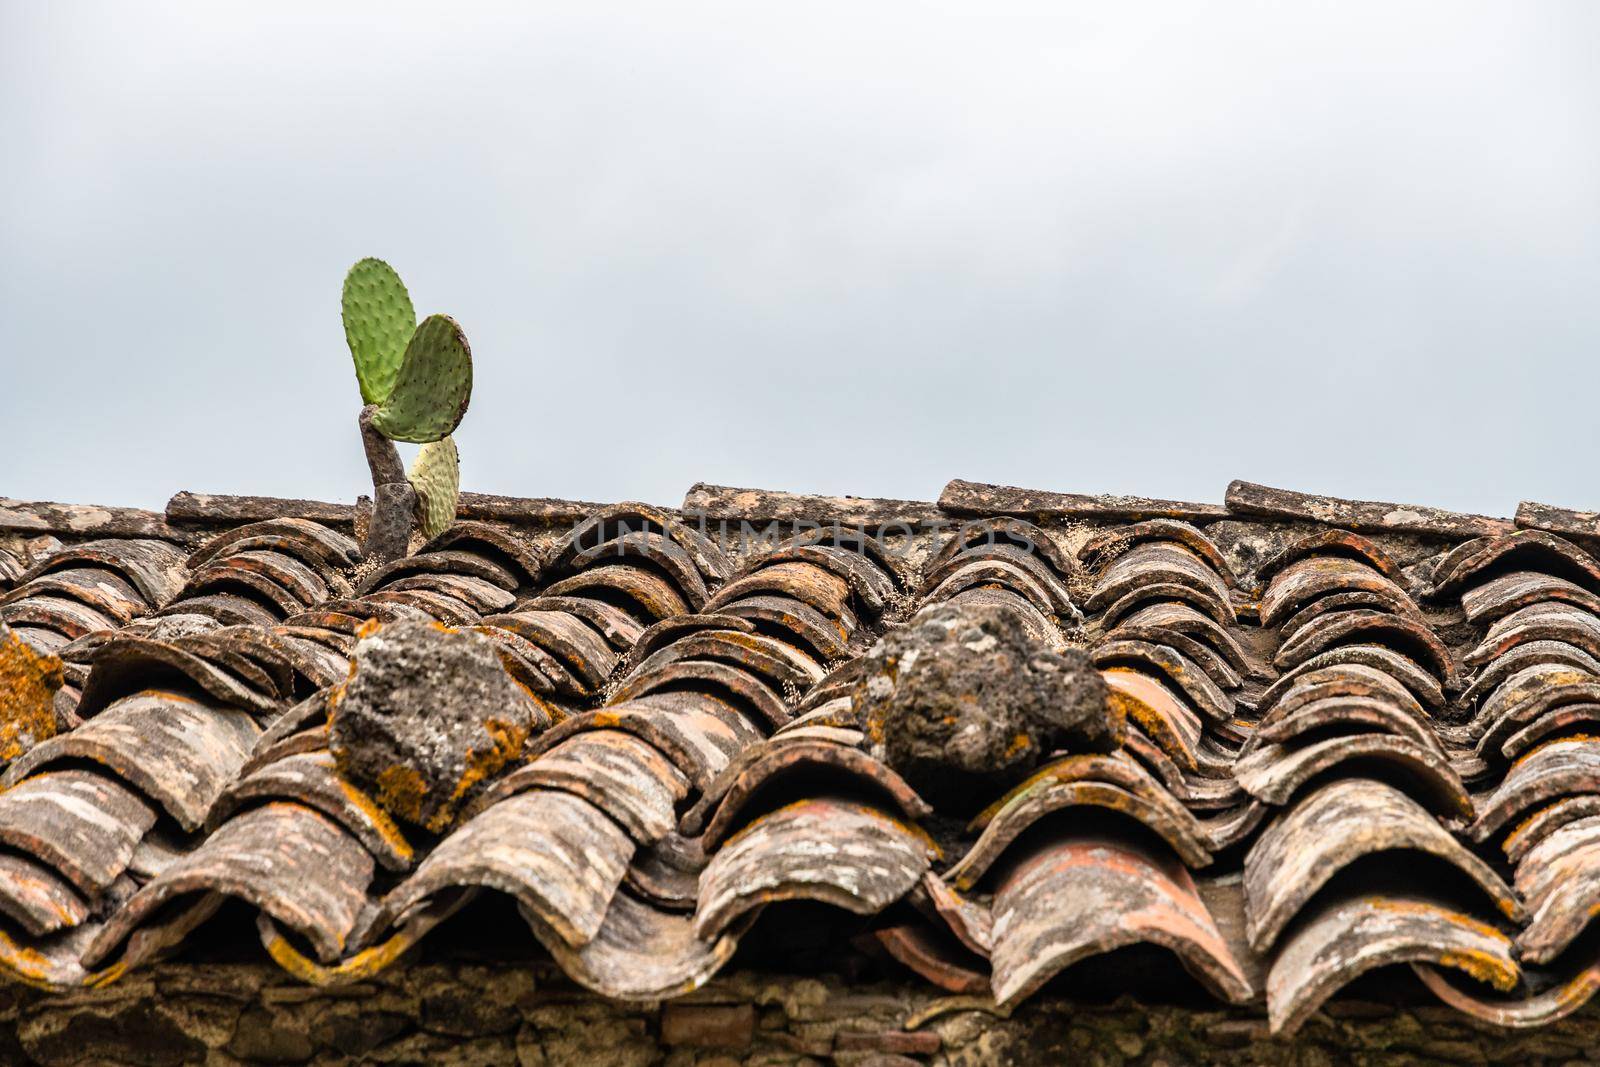 prickly pear plant growing on top of an abandoned tile roof, Sicily by mauricallari